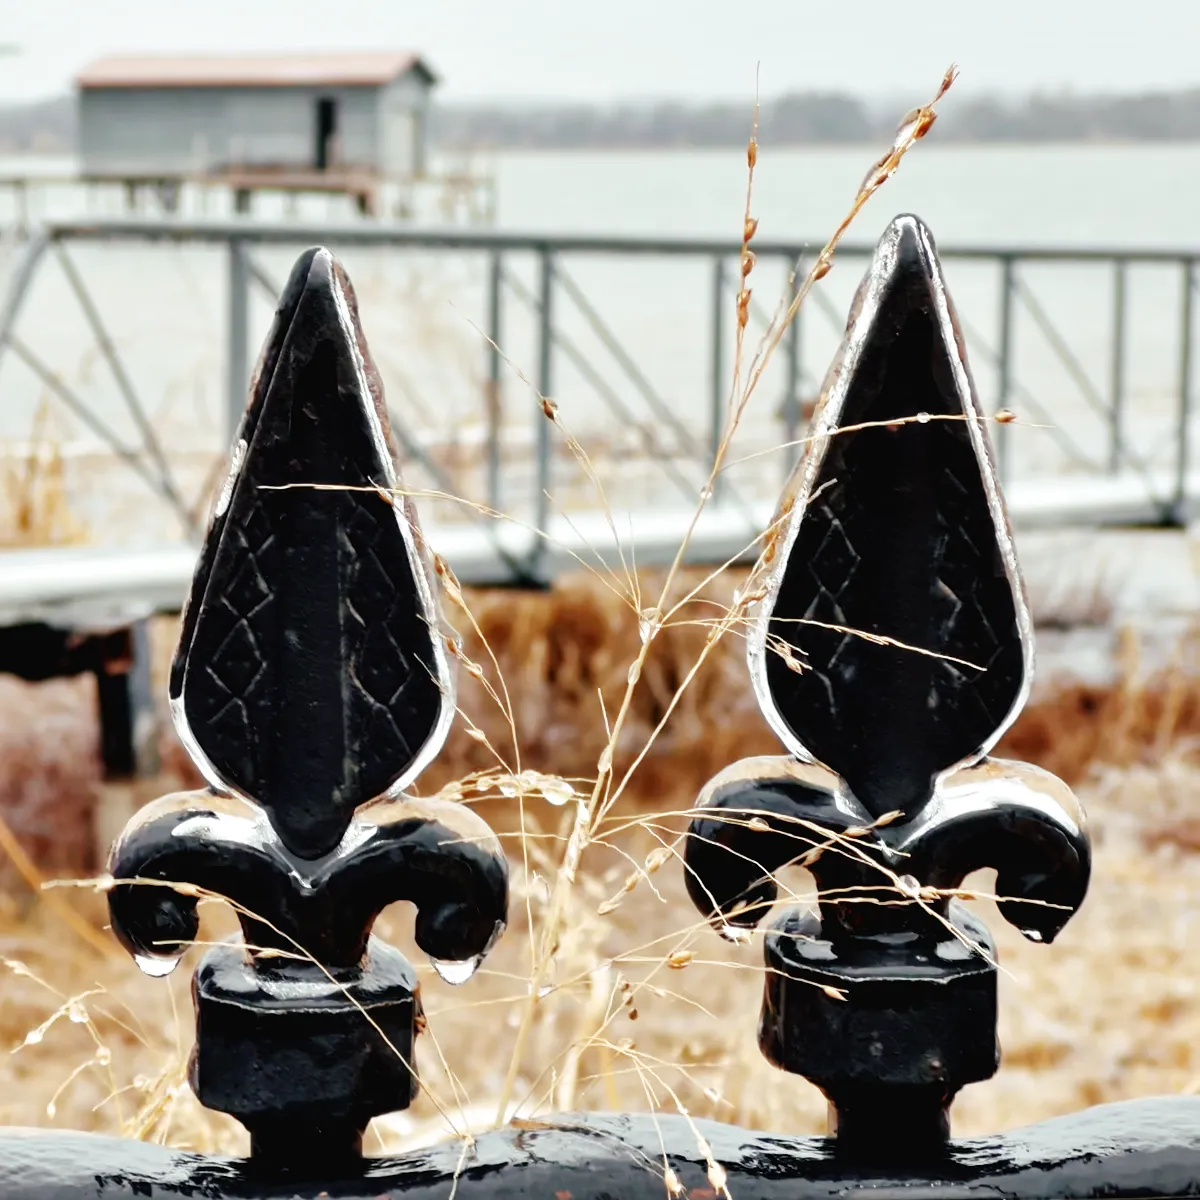 Iron fence covered with almost a centimeter of ice. A cold looking lake in the background.